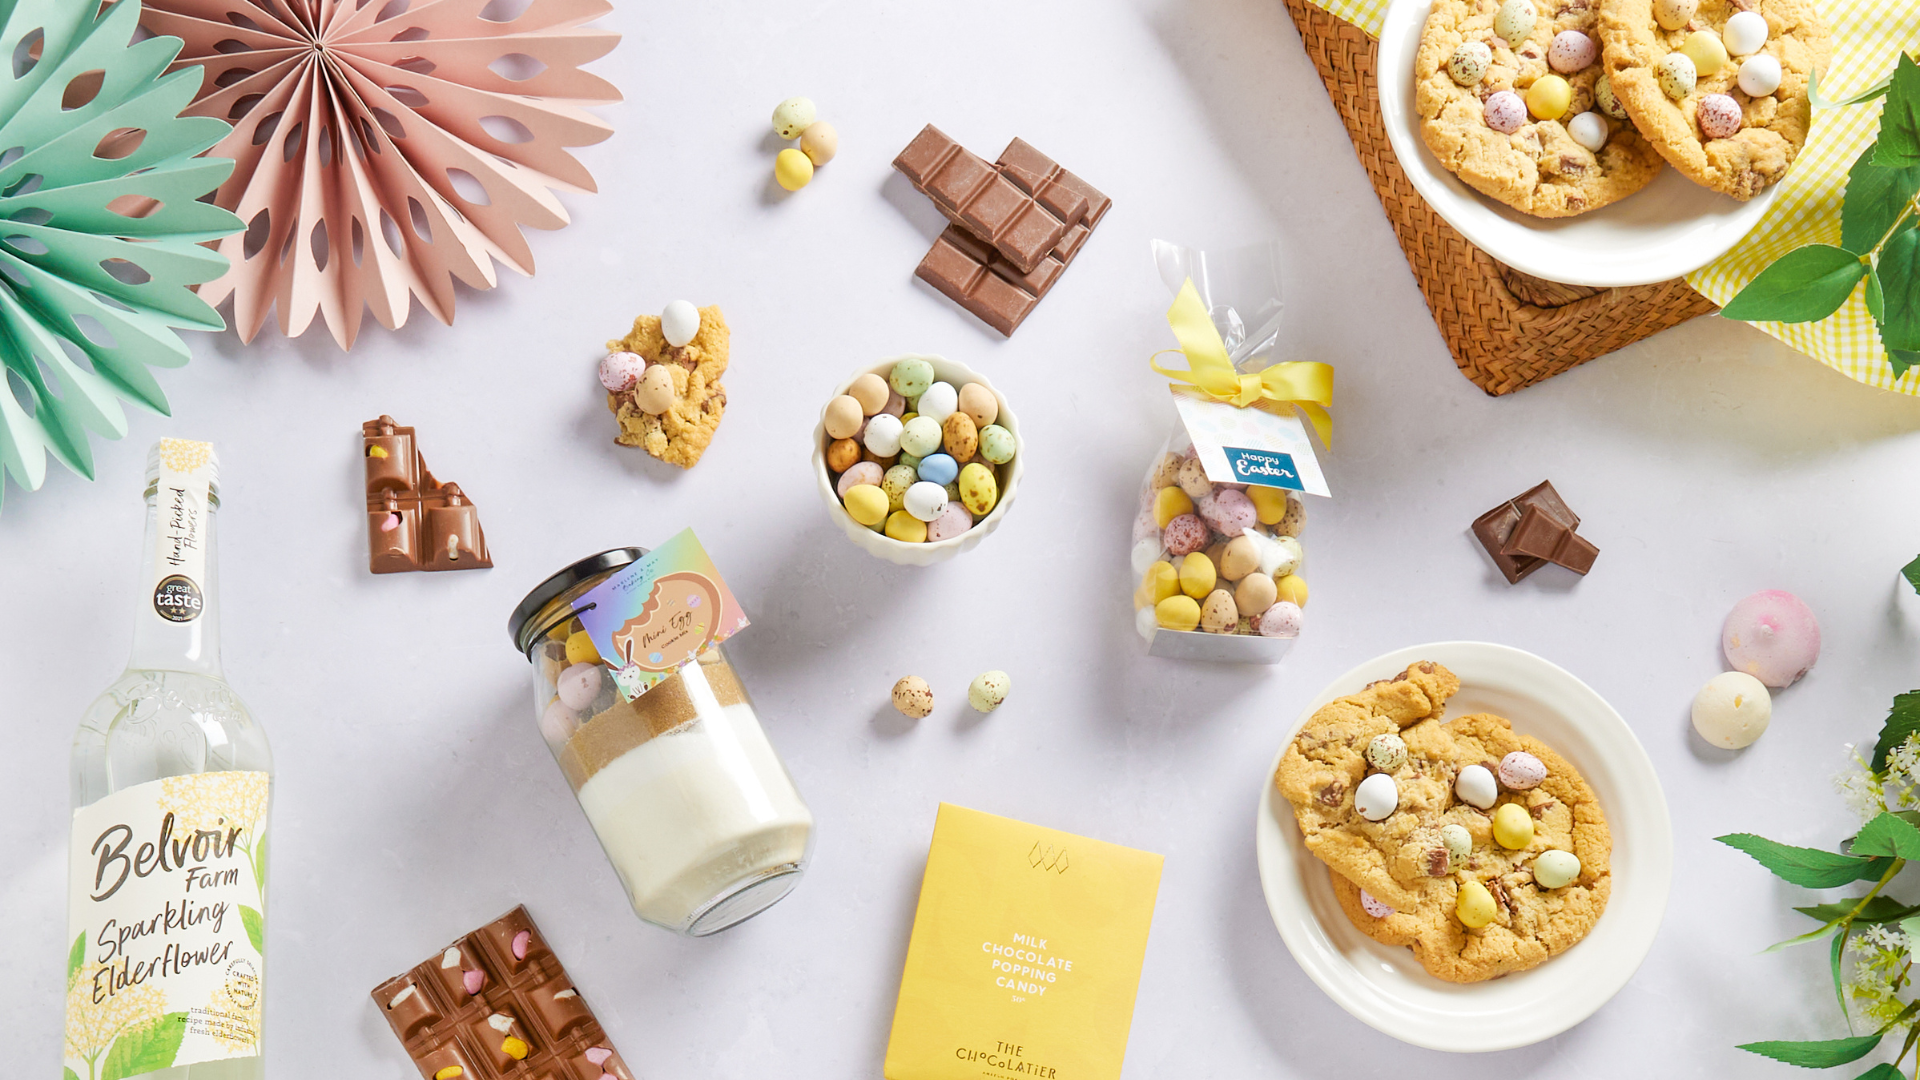 Flat lay of Easter products from hampers.com Easter gifts, including chocolate eggs and cookies